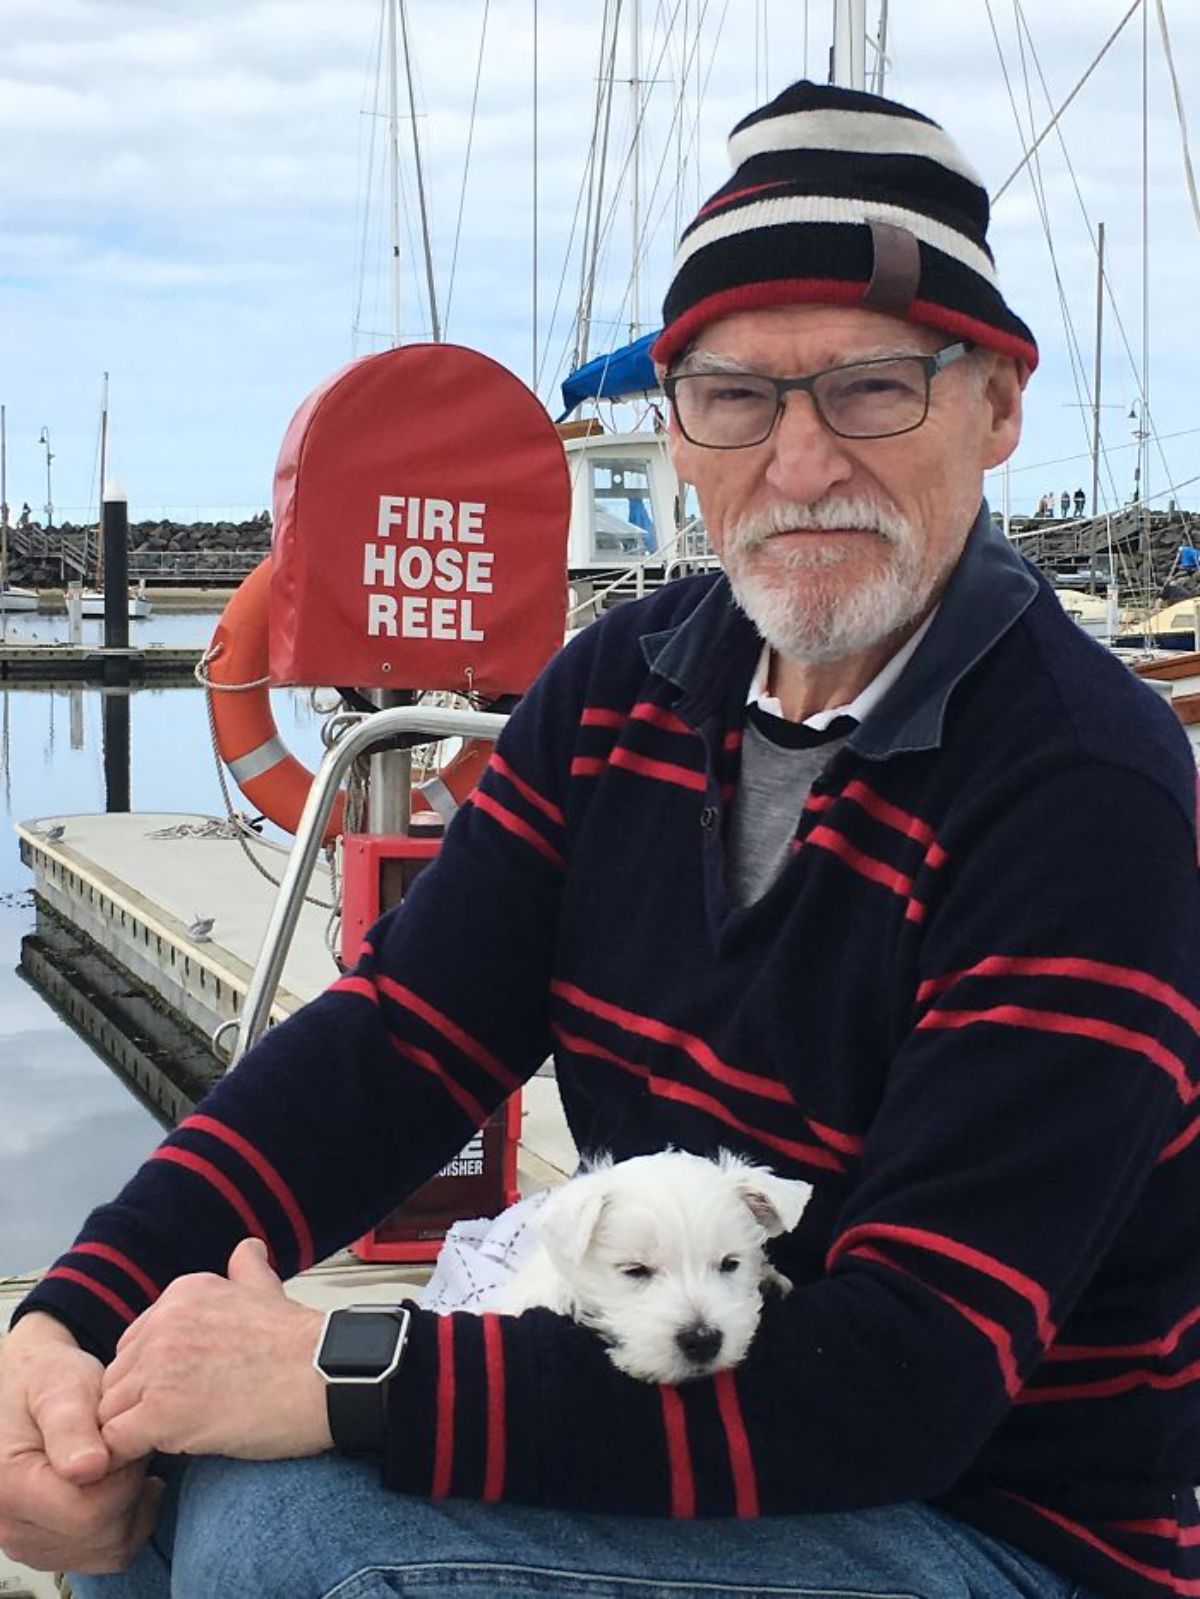 small fluffy white puppy being held by an old man by a boat